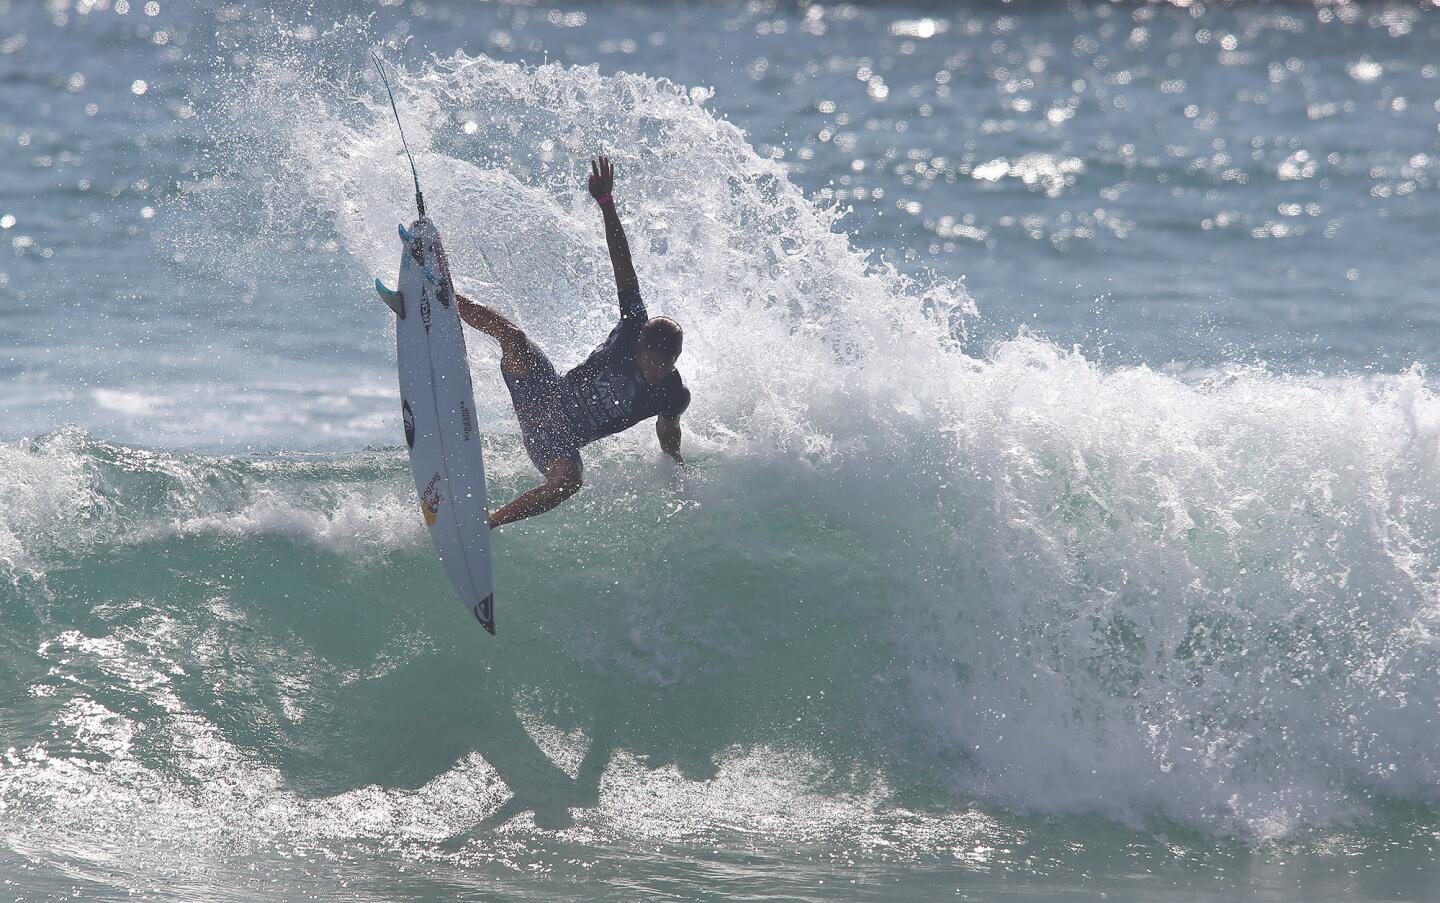 Photo Gallery: US Open of Surfing Sunday